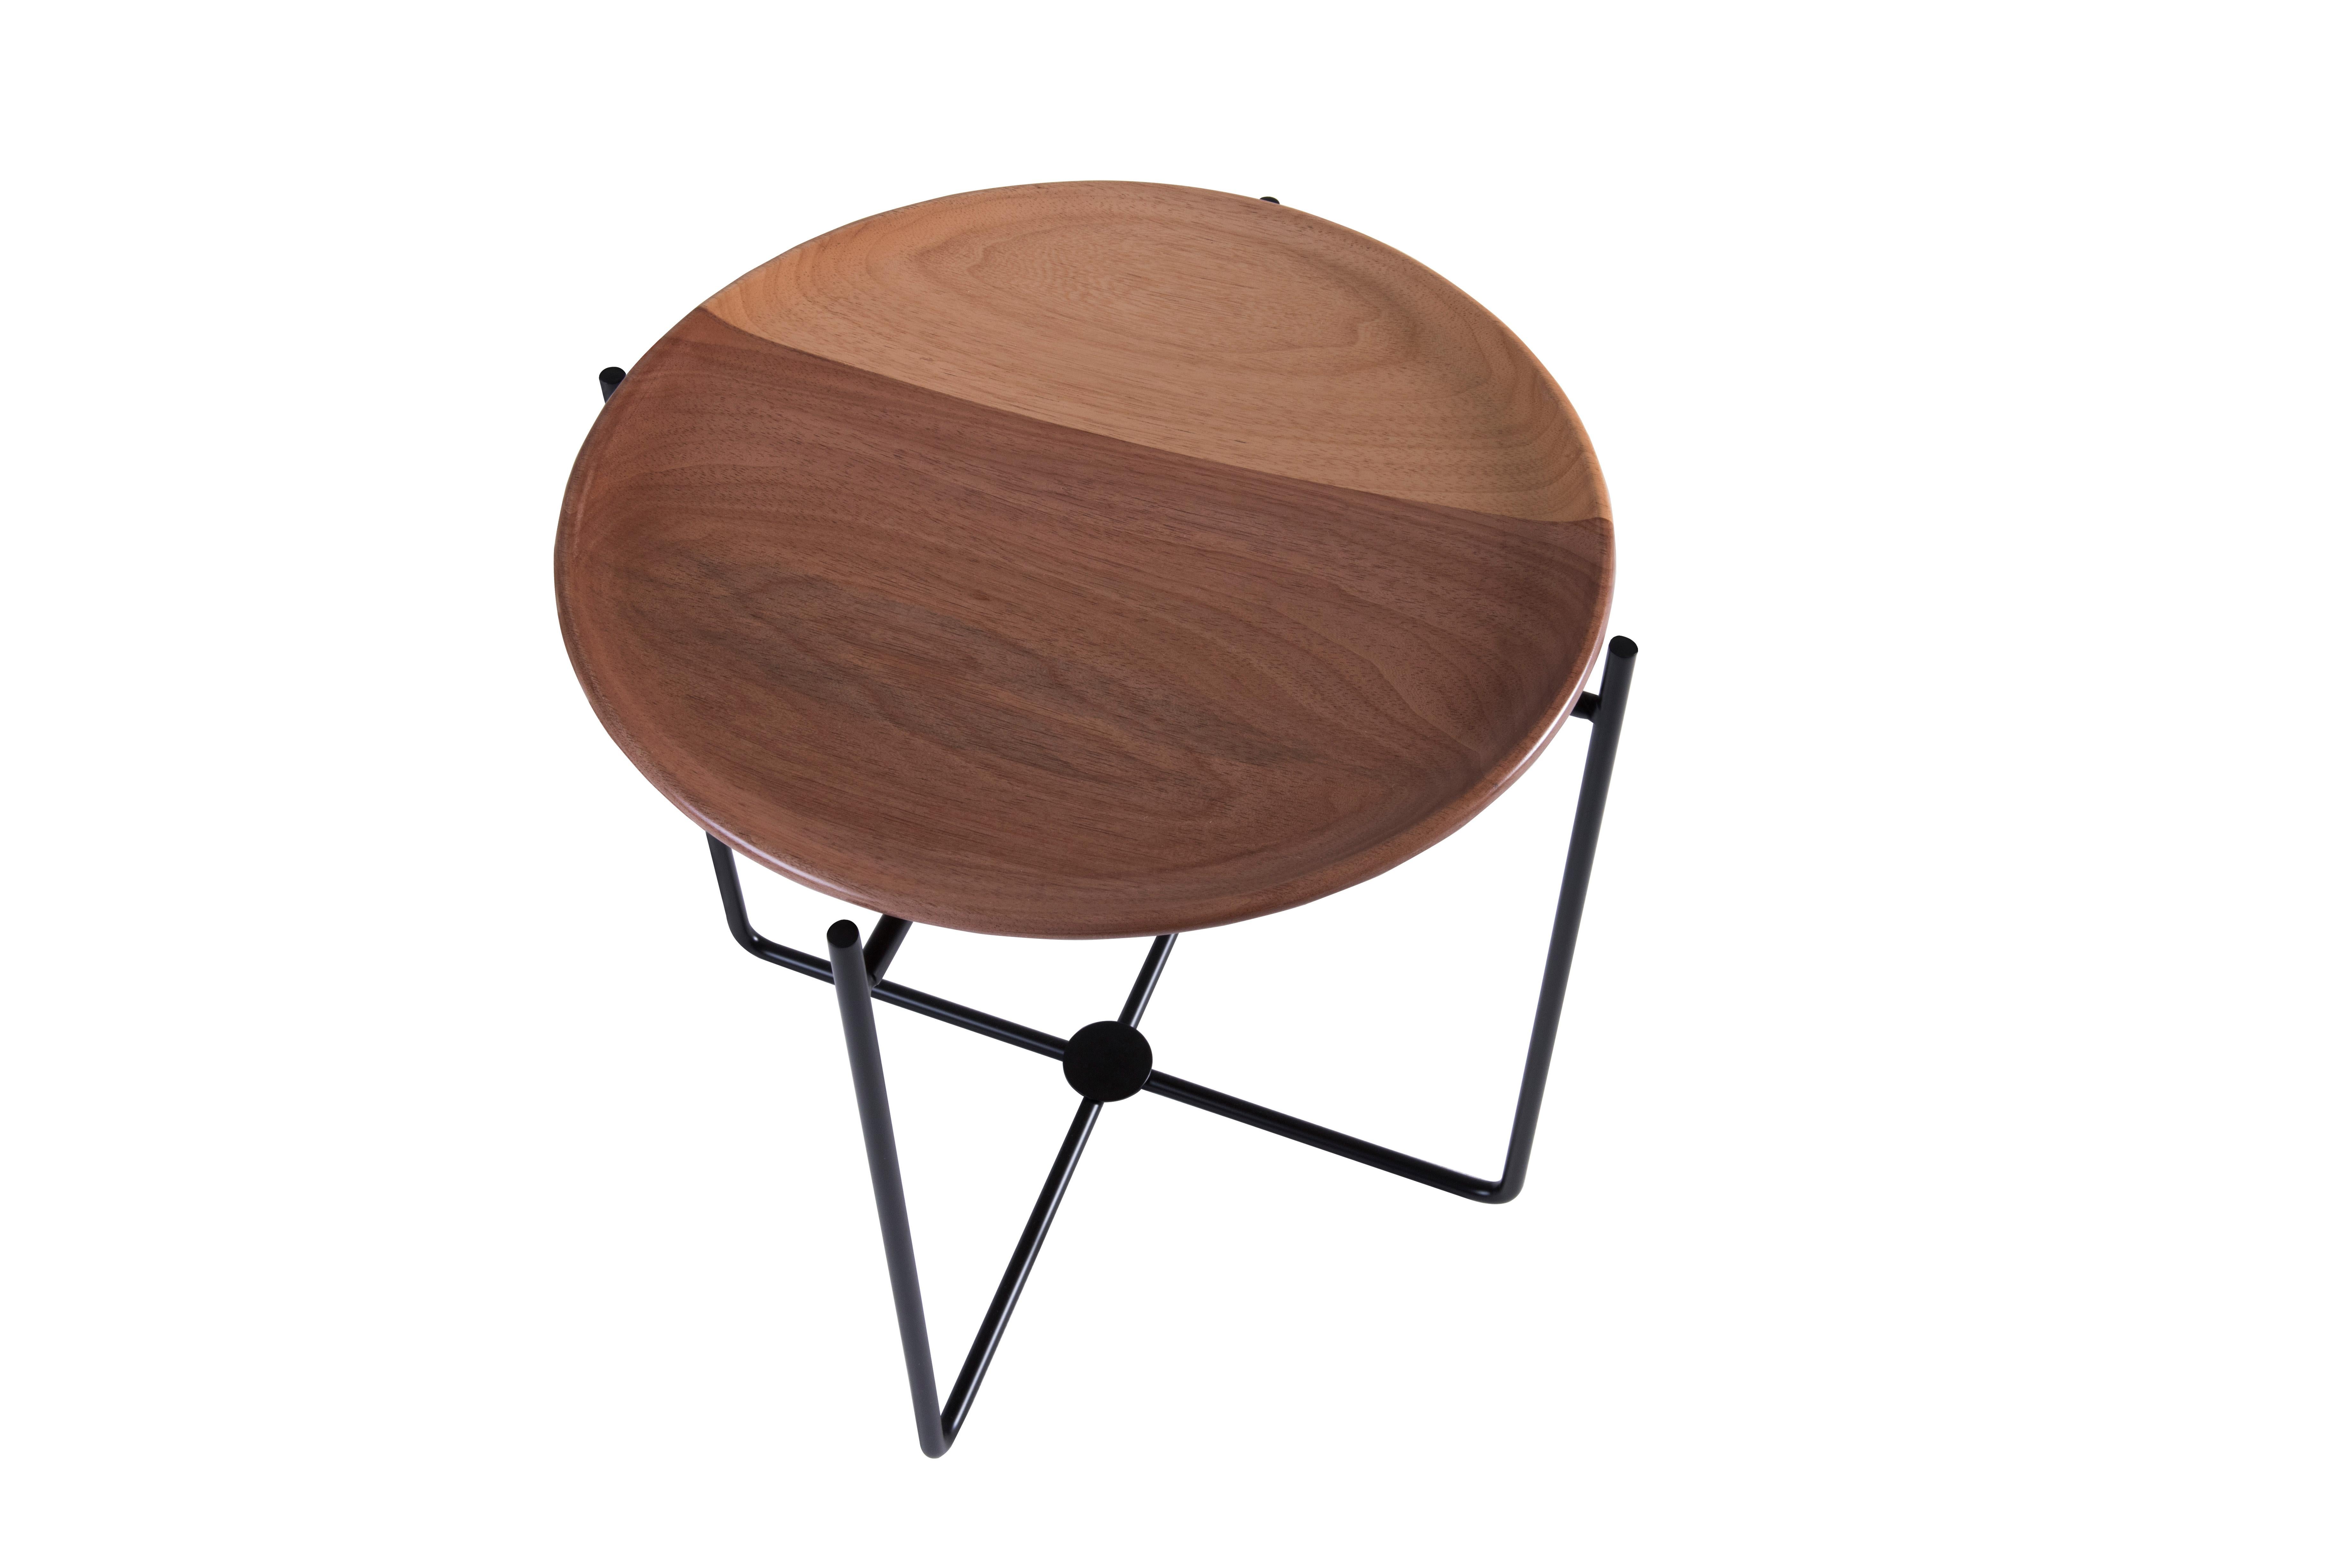 The Wood is a multifunctional piece, it can be used as a side table or an ottoman to sit on.
The structure is made in carbon steel painted in automotive paint with different colors options, as black, golden, rosé and gray. (matte finish)
The